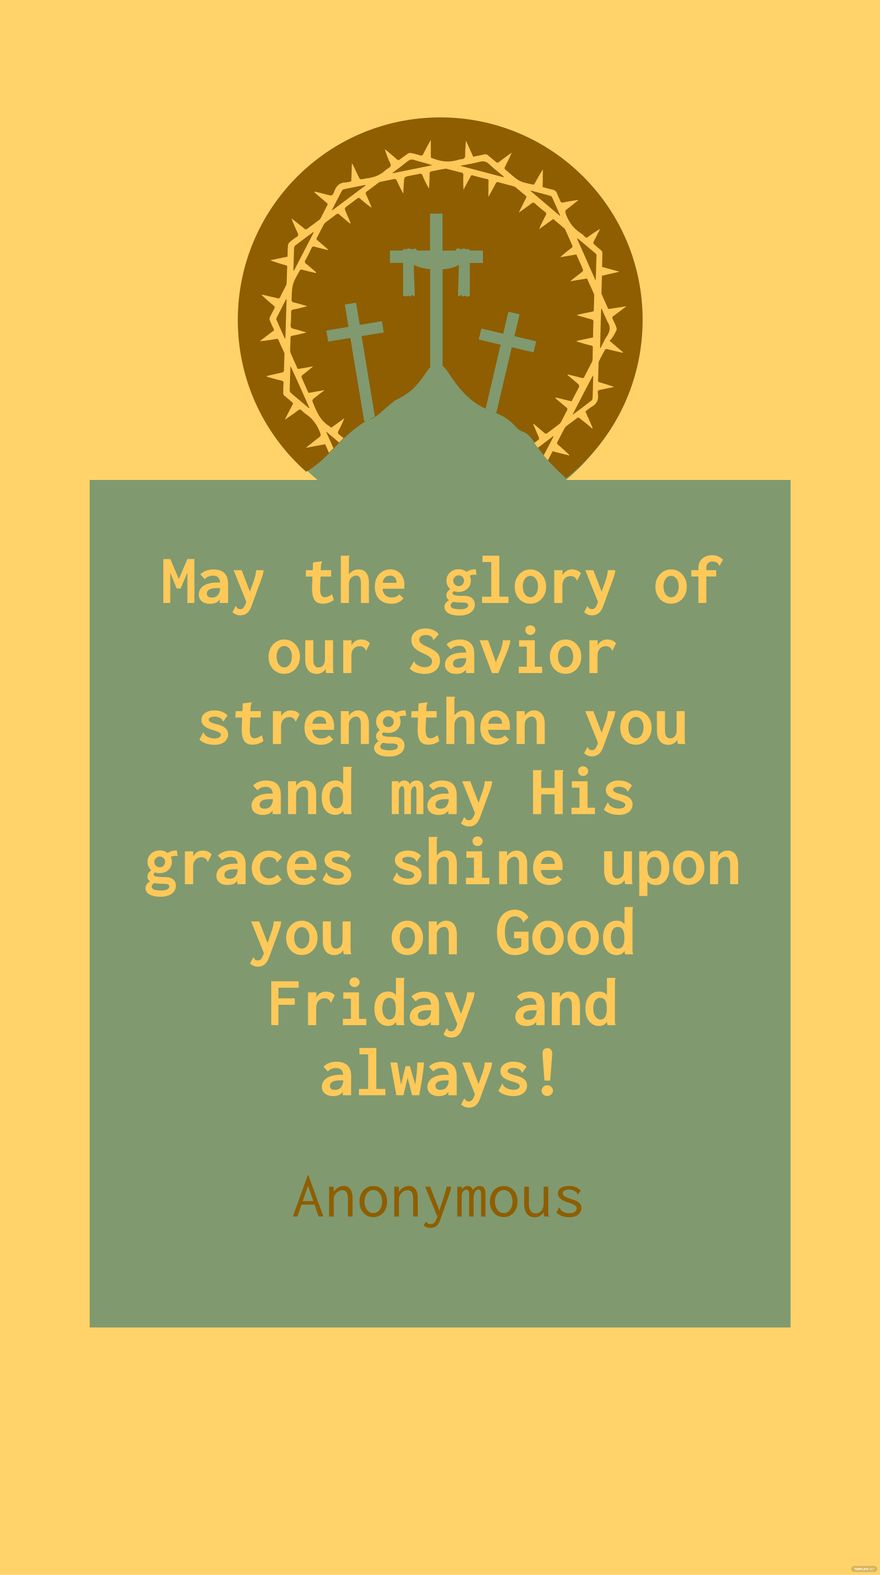 Free Anonymous - May the glory of our Savior strengthen you and may His graces shine upon you on Good Friday and always! in JPG